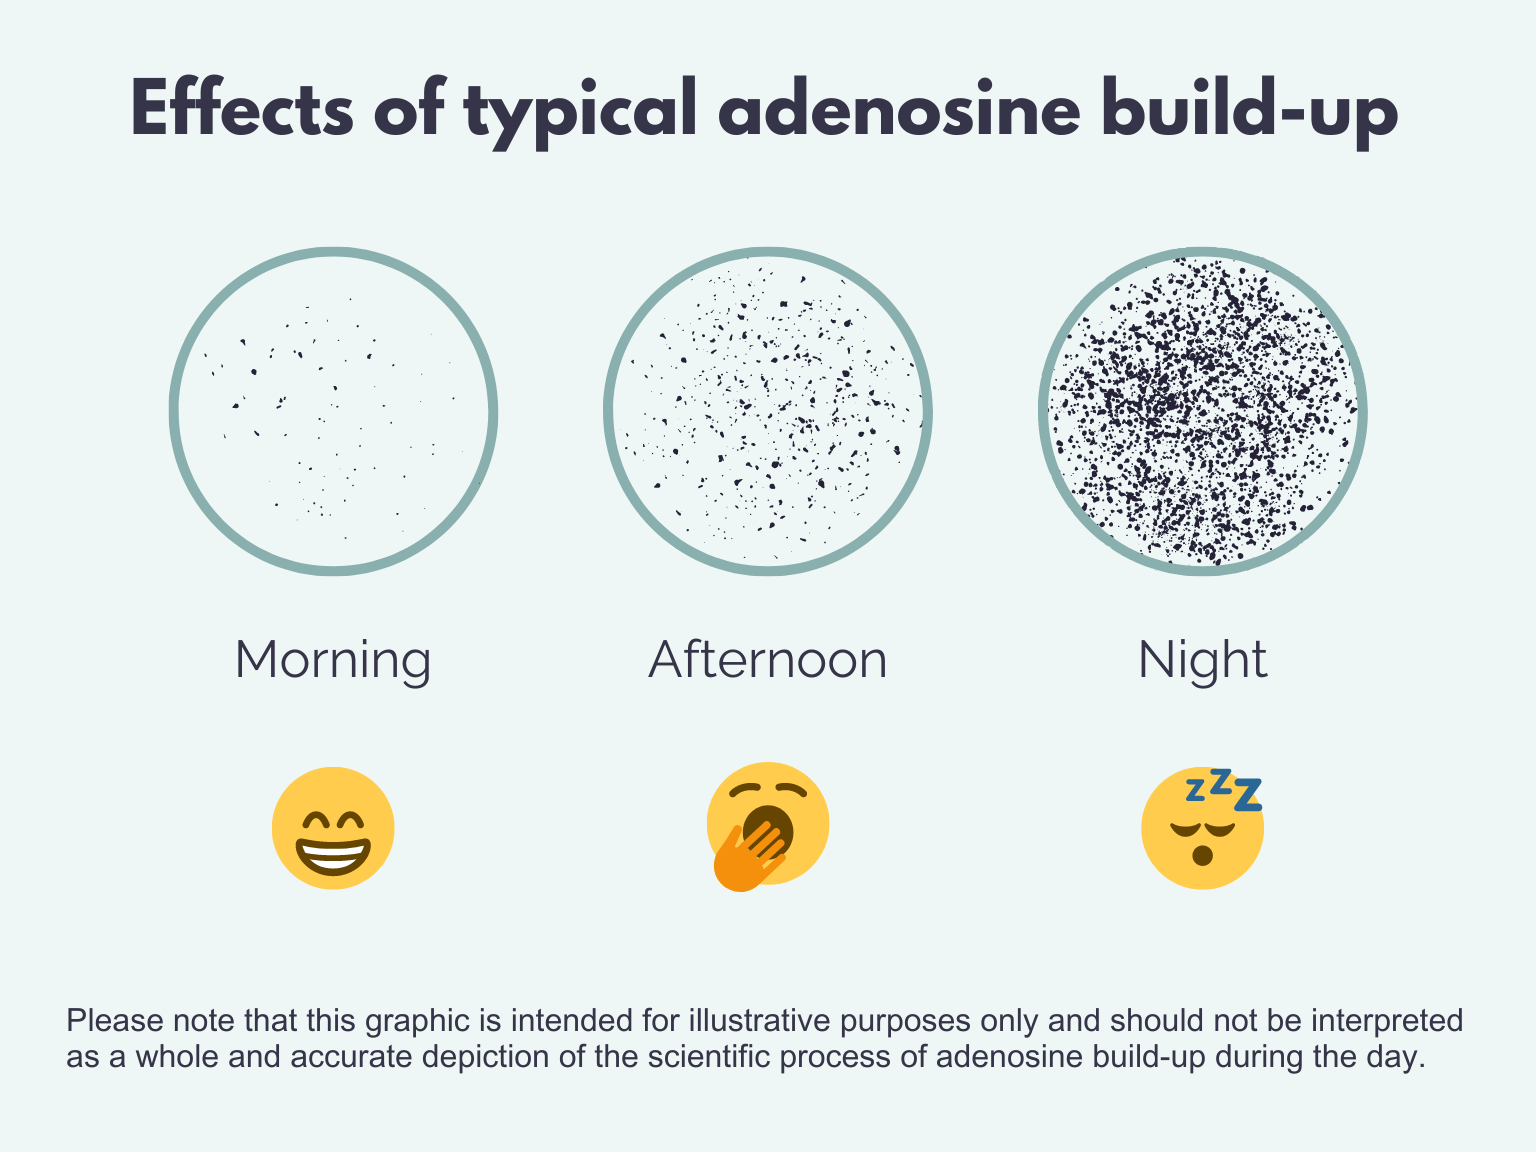 title: effects of typical adenosine build up. morning shows very little speckles and an awake emoji. afternoon shows more specks and a tired emoji. Night shows a lot of specs and a sleeping emoji. Note at bottom: Please note that this graphic is intended for illustrative purposes only and should not be interpreted as a whole and accurate depiction of the scientific process of adenosine build-up during the day.  